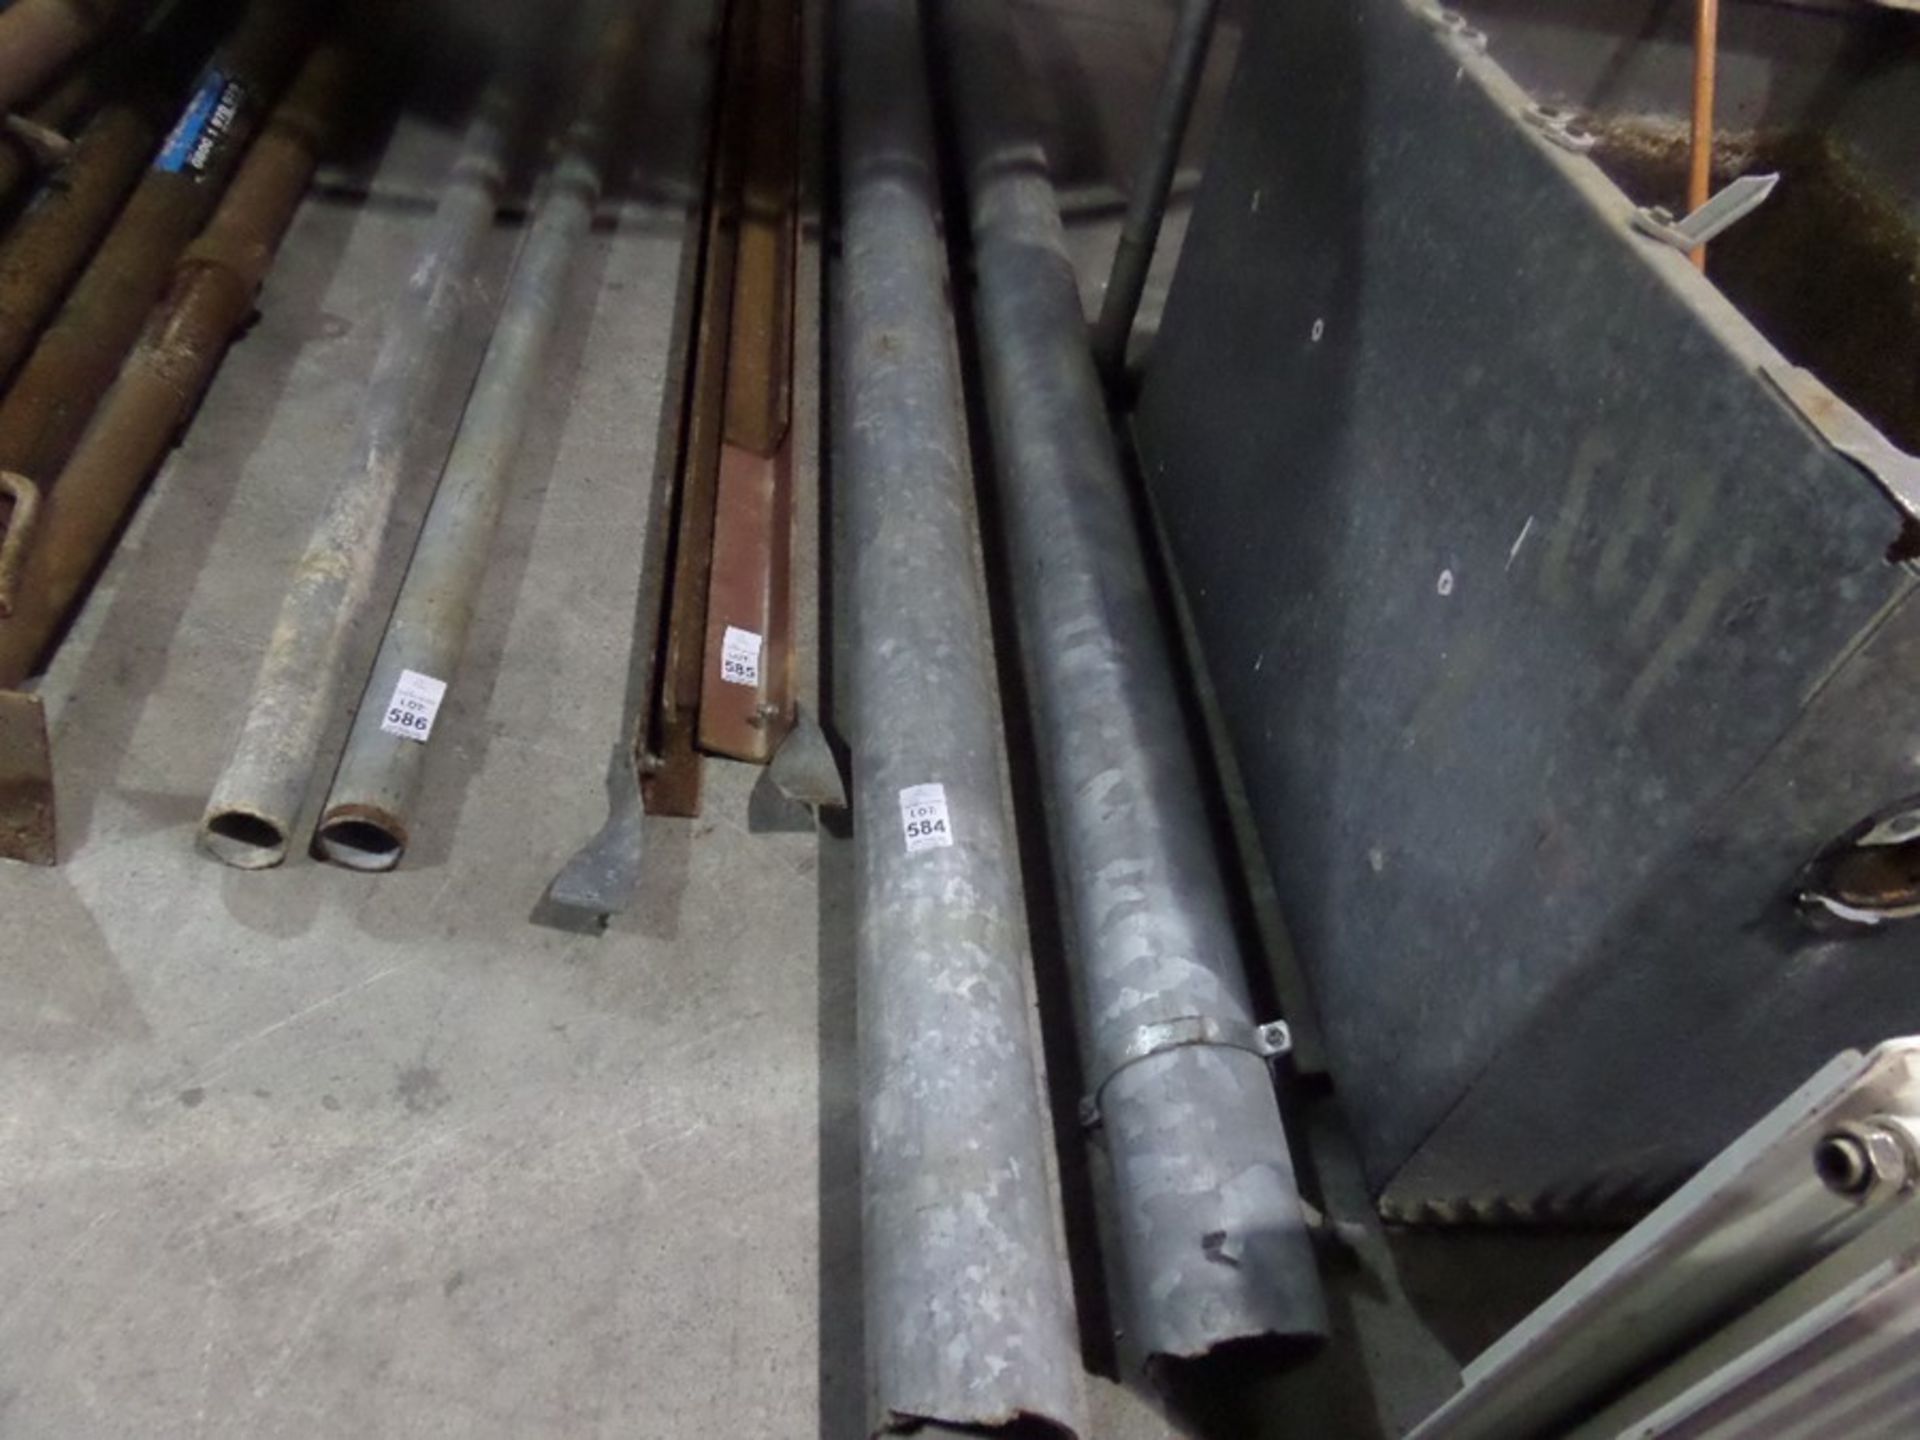 2 GALVANIZED PIPES (9FT AND 11FT)